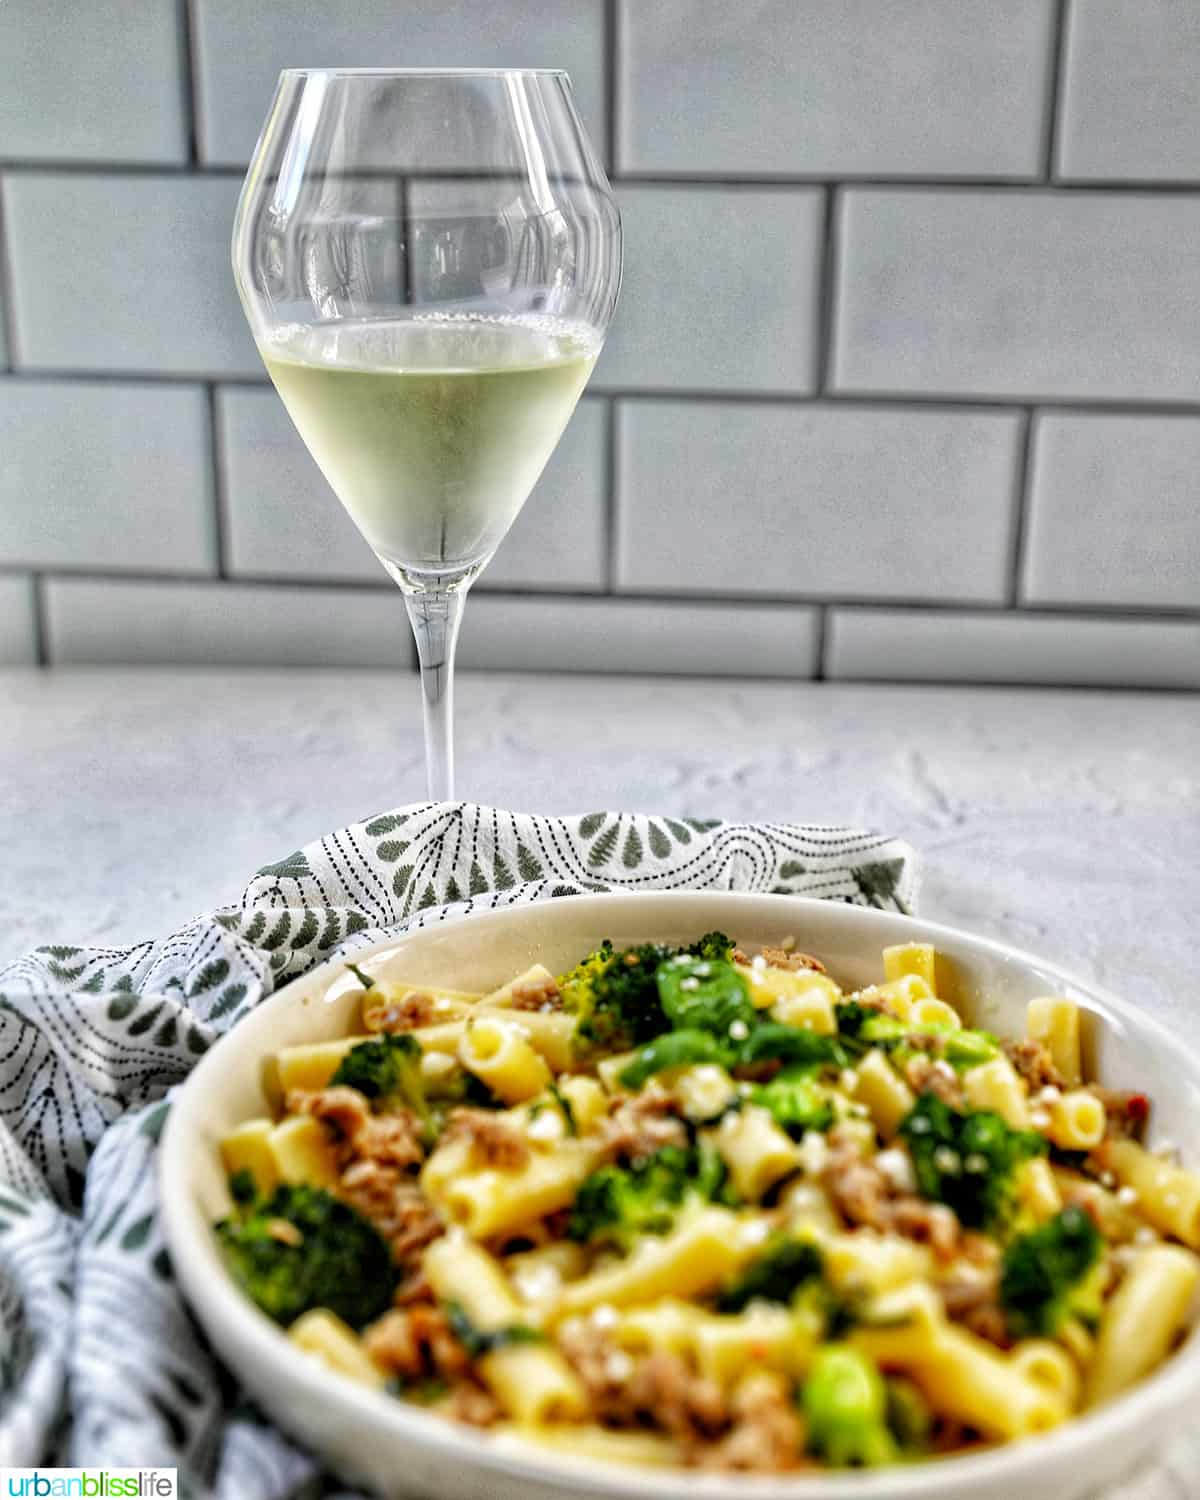 bowl of Italian Sausage and Broccoli pasta with a glass of white wine.